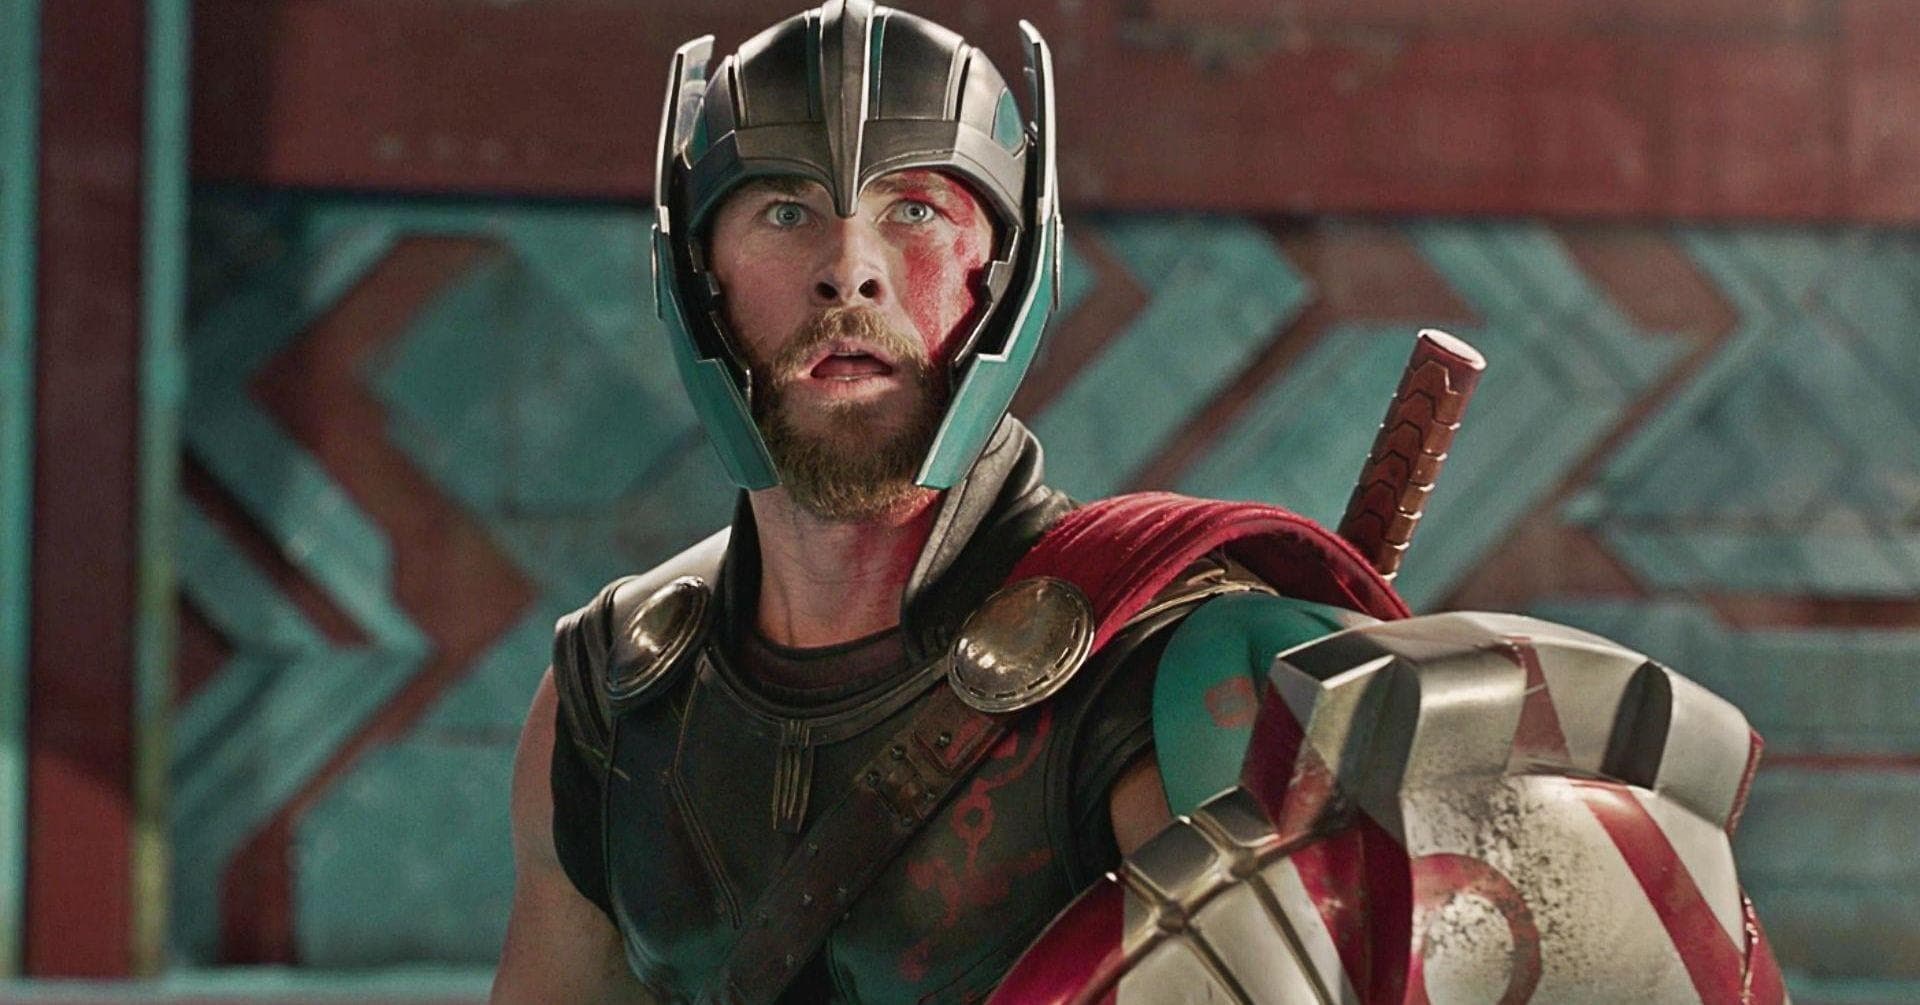 In 2017's Thor: Ragnarok, Thor and Hulk argue. When Thor apologizes,  instead of calling himself “Hulk”, Hulk says “I just get so angry all the  time,” showing how Thor's friendship brings out